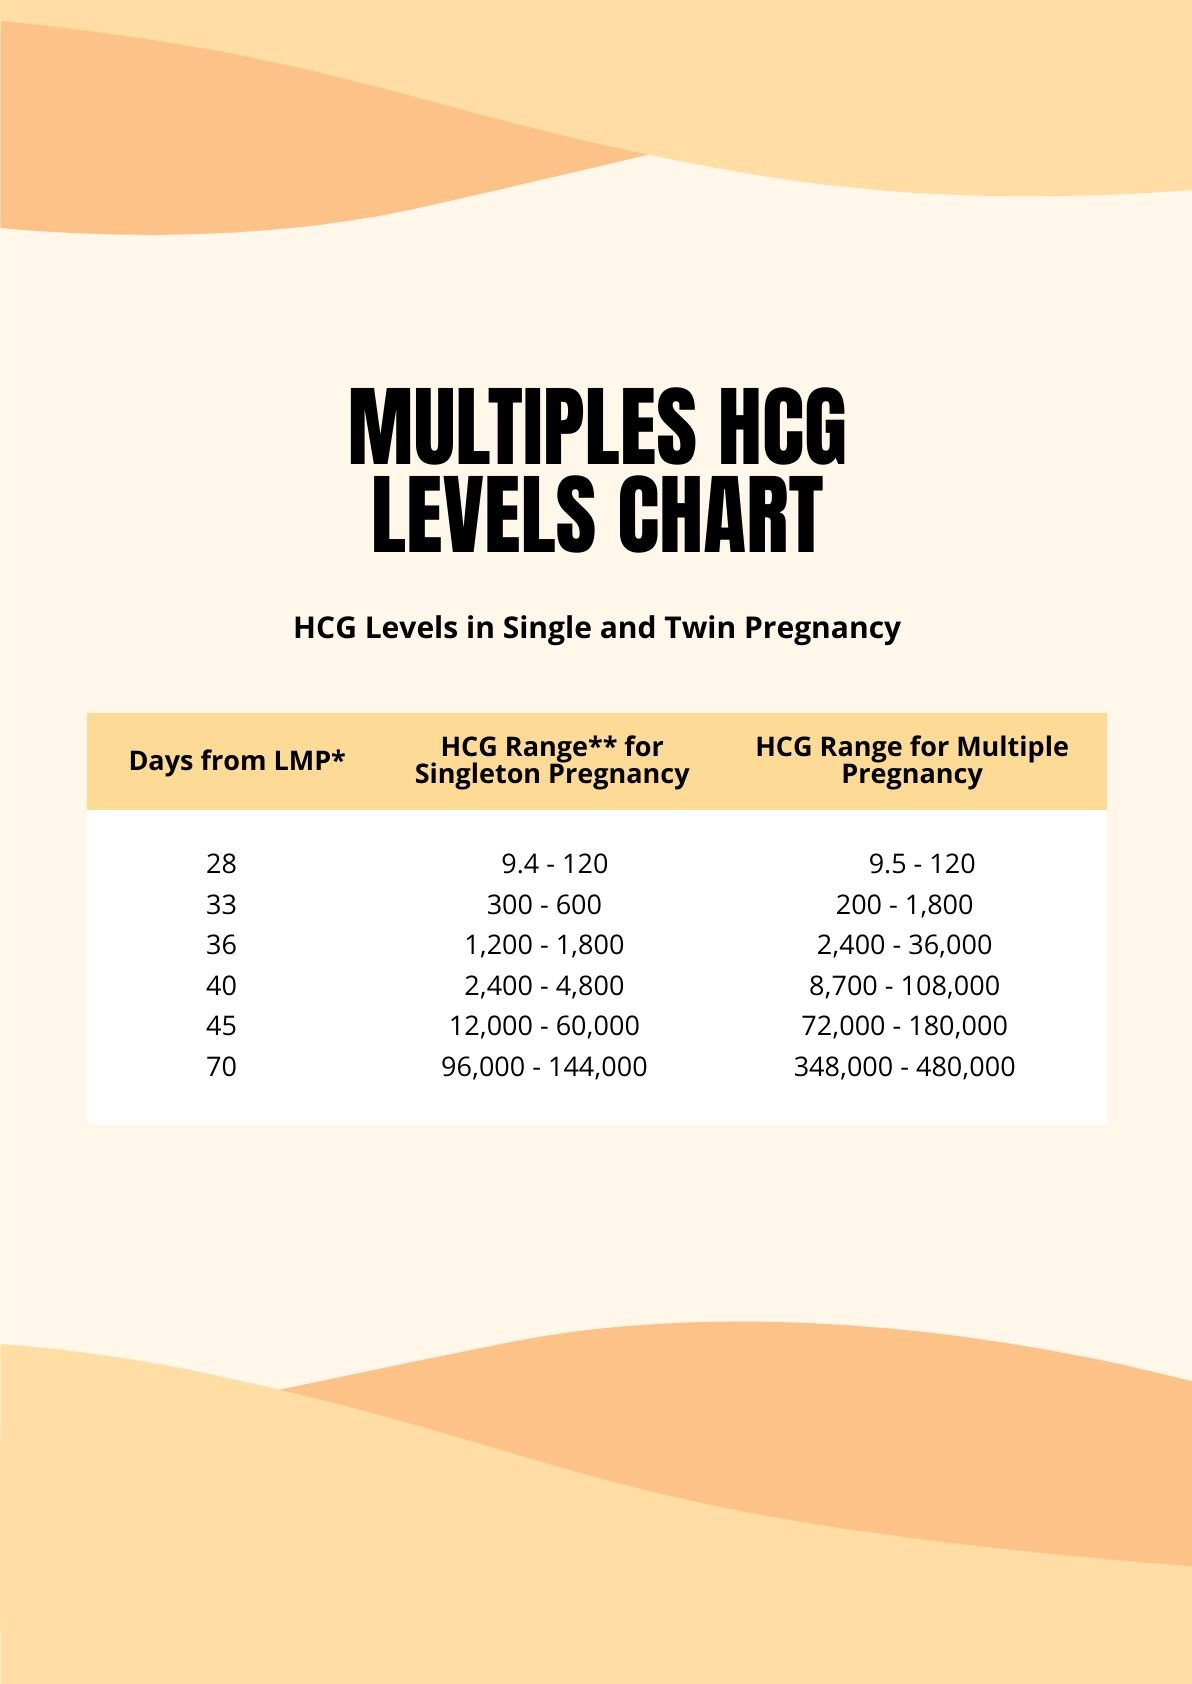 Multiples HCG Levels Chart in PDF